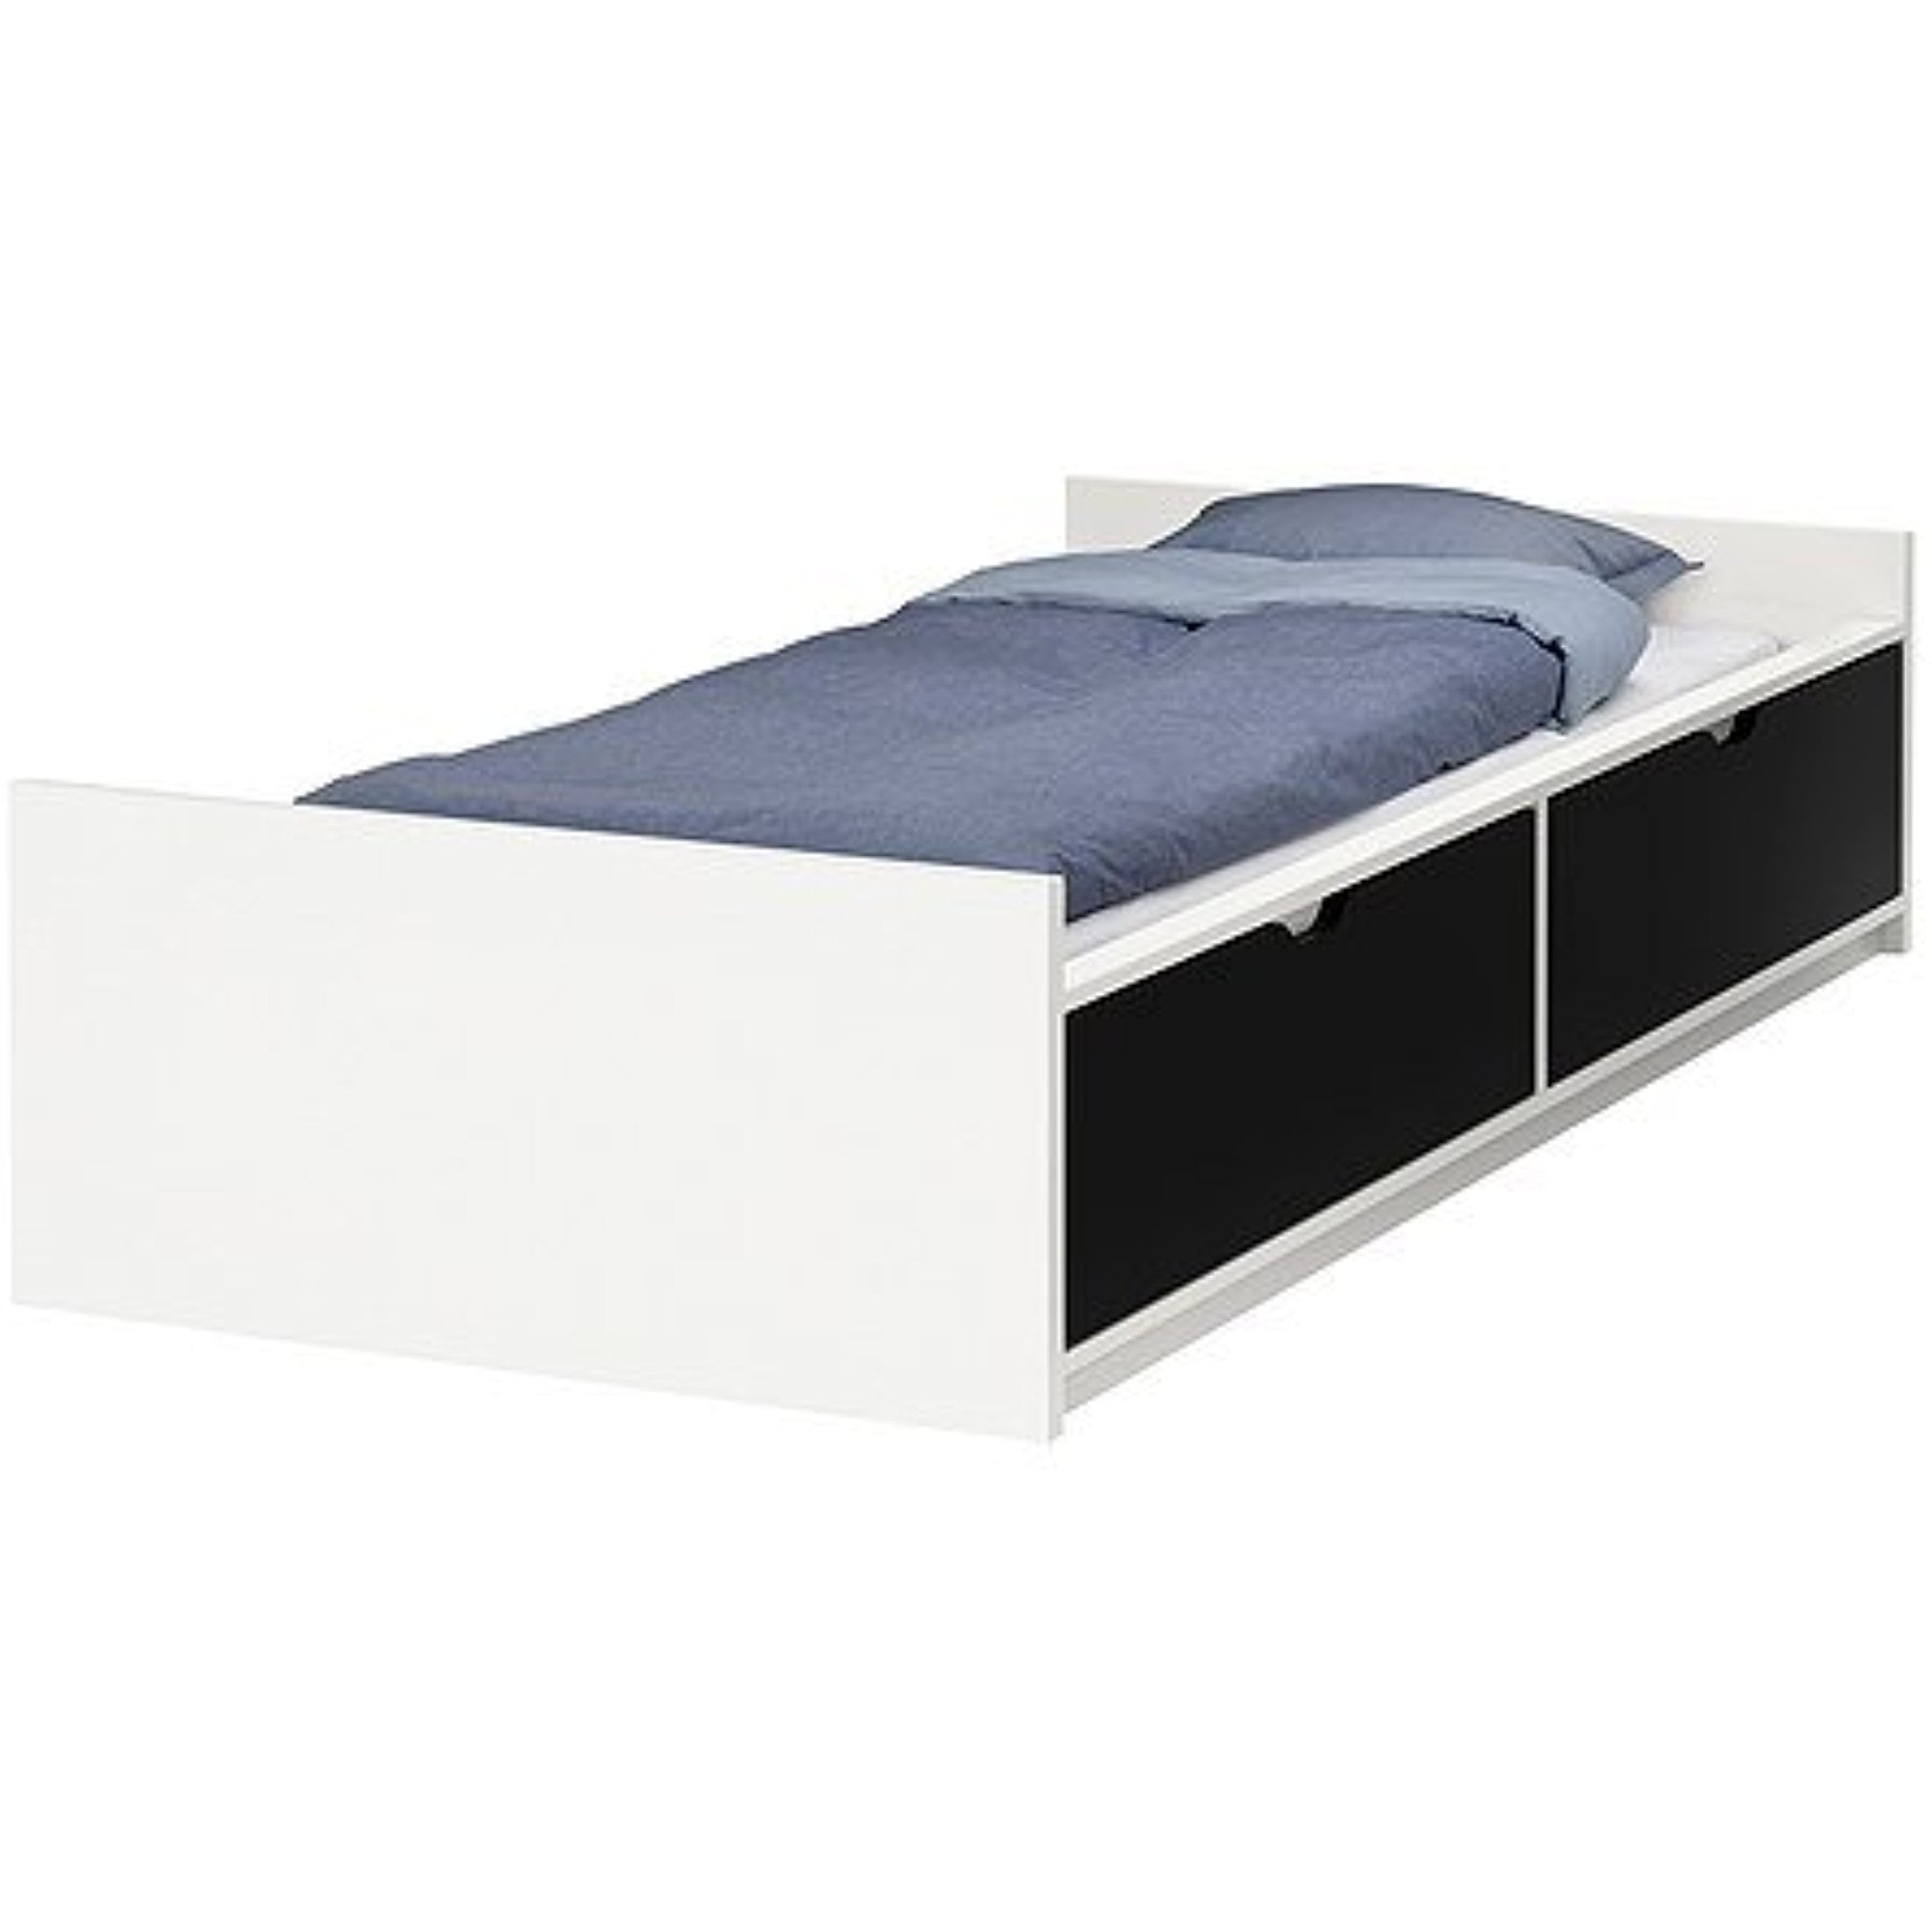 Ikea Twin Size Bed Frame W, Ikea Portable Bed Frame